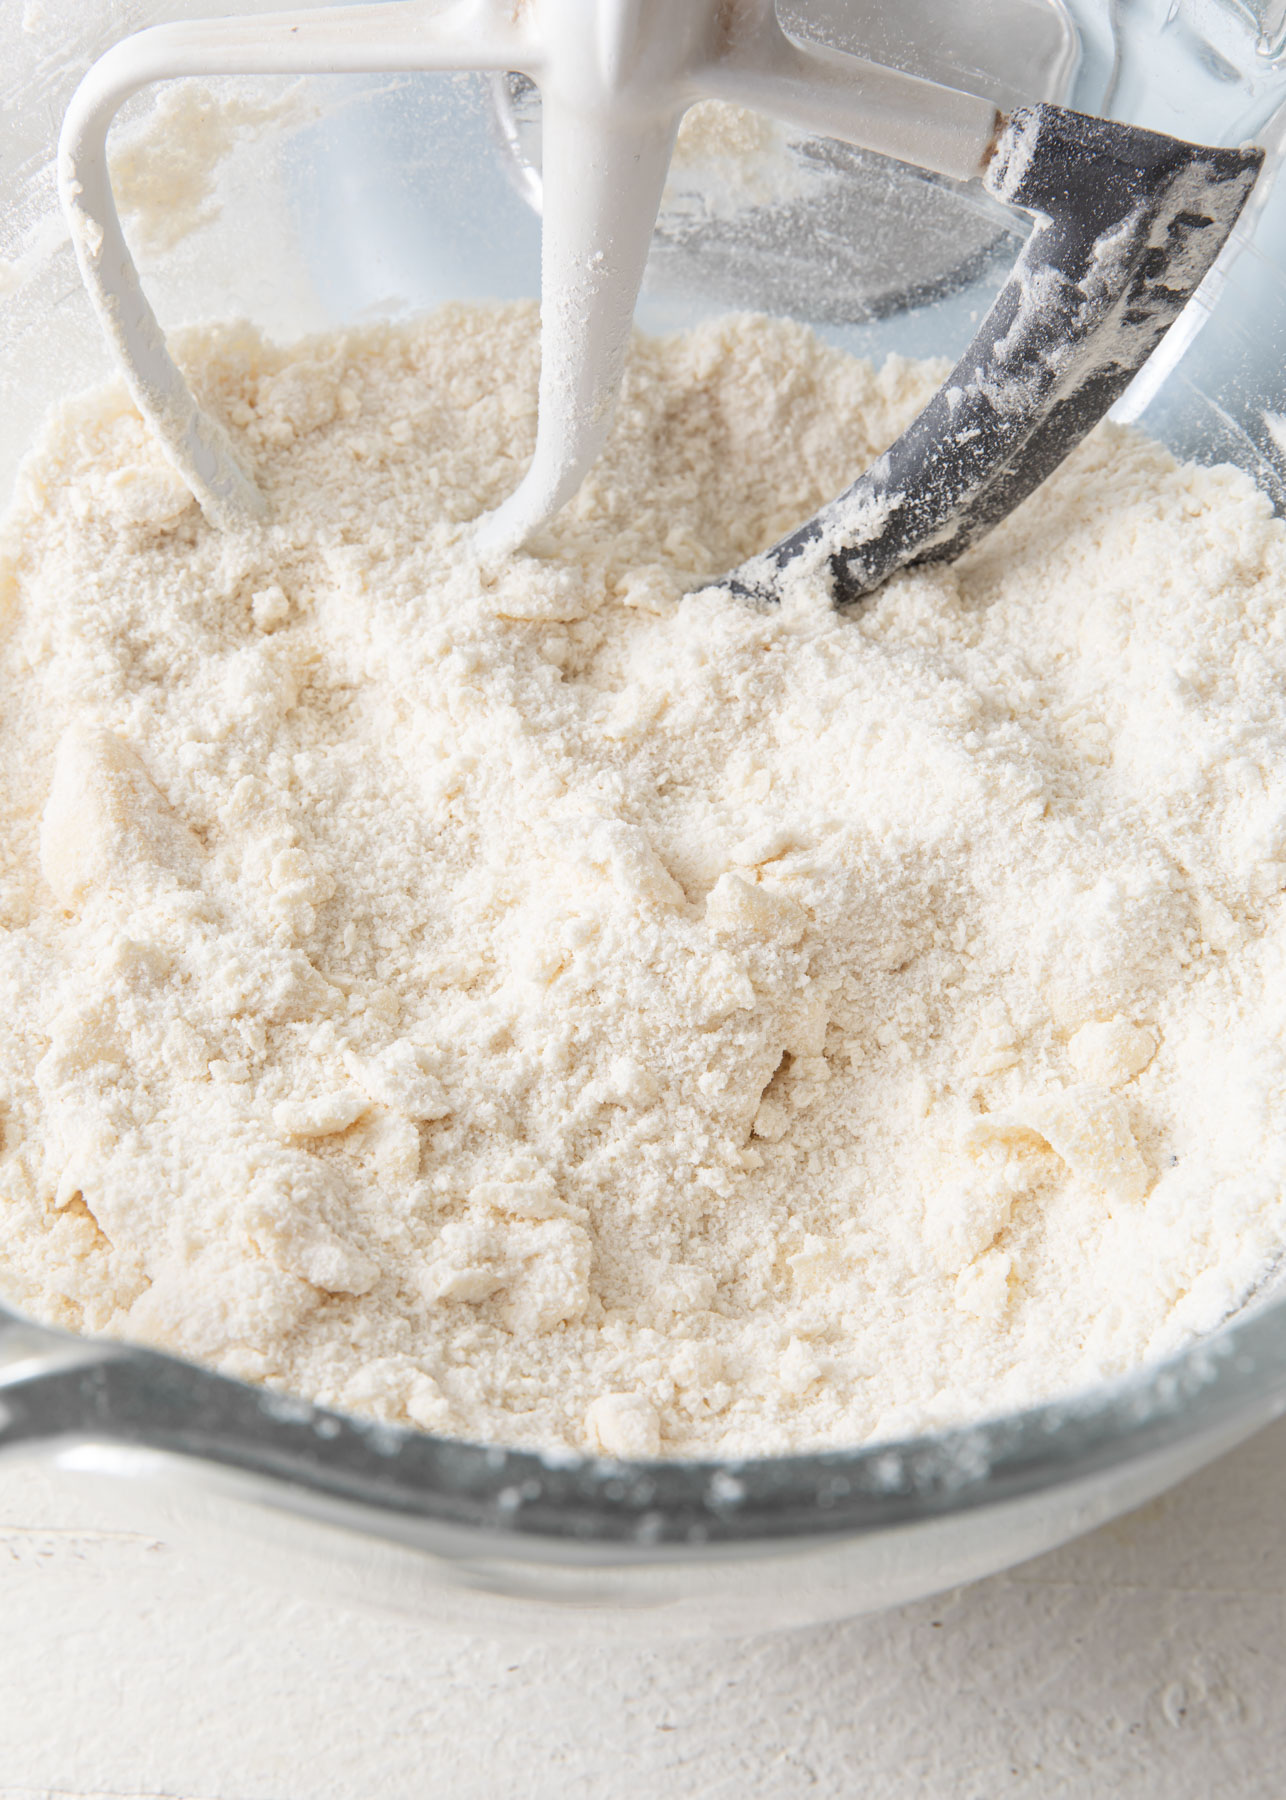 The dry ingredients blended with butter in a reverse creaming method cake recipe